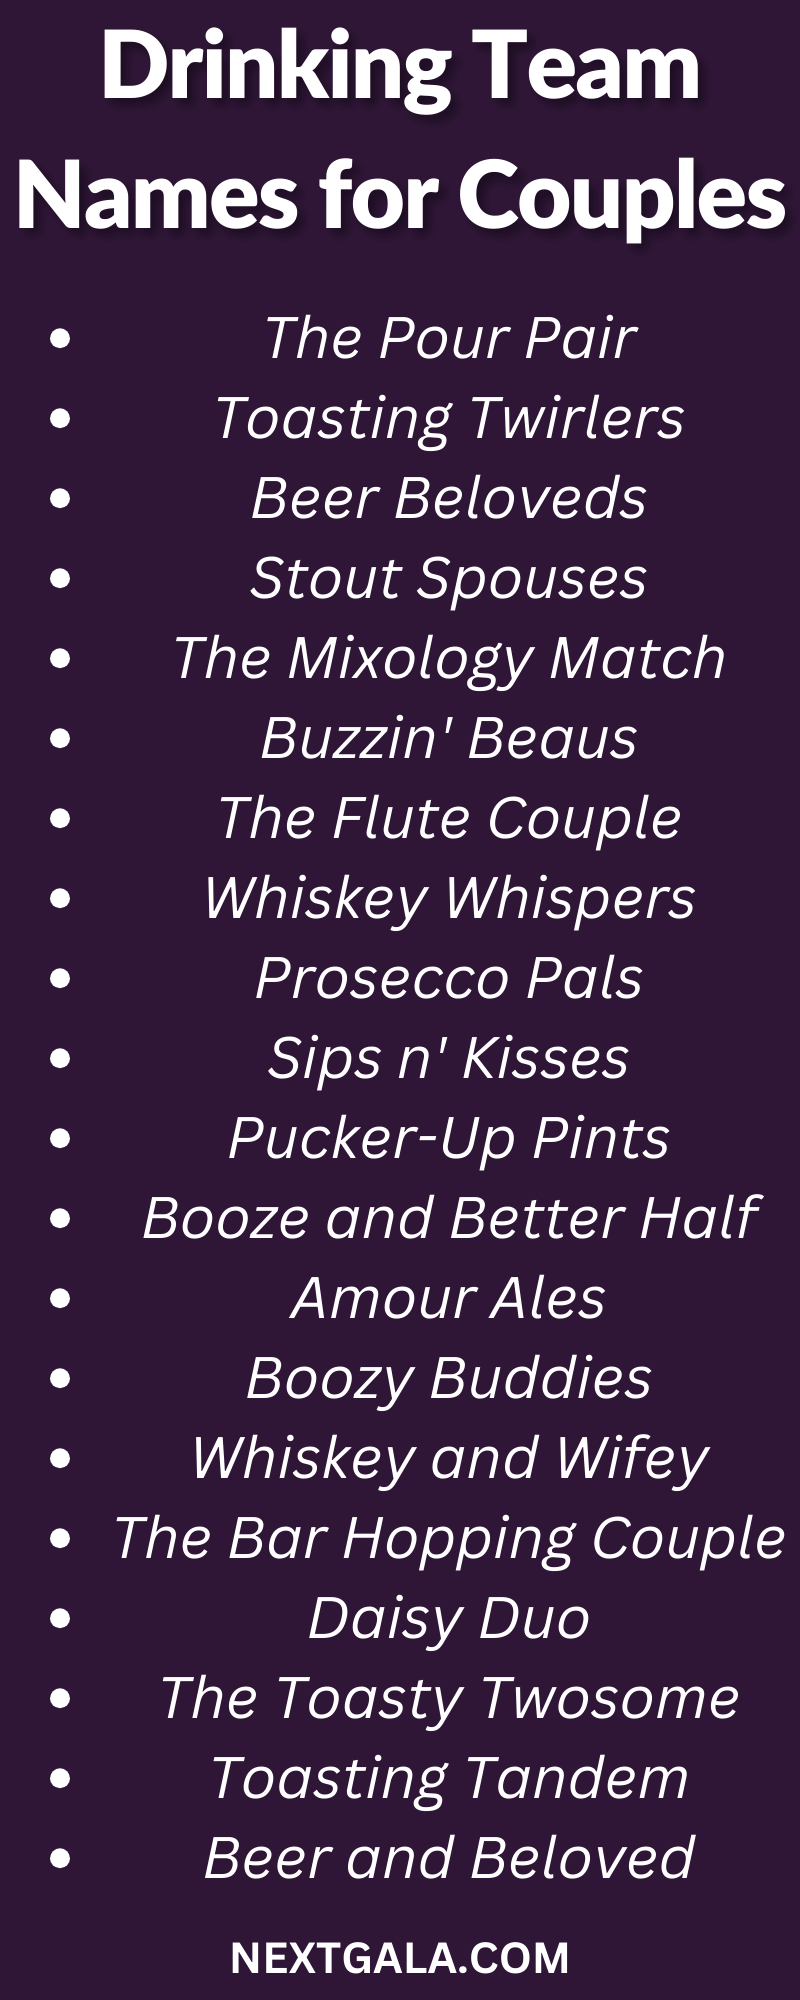 Drinking Team Names for Couples